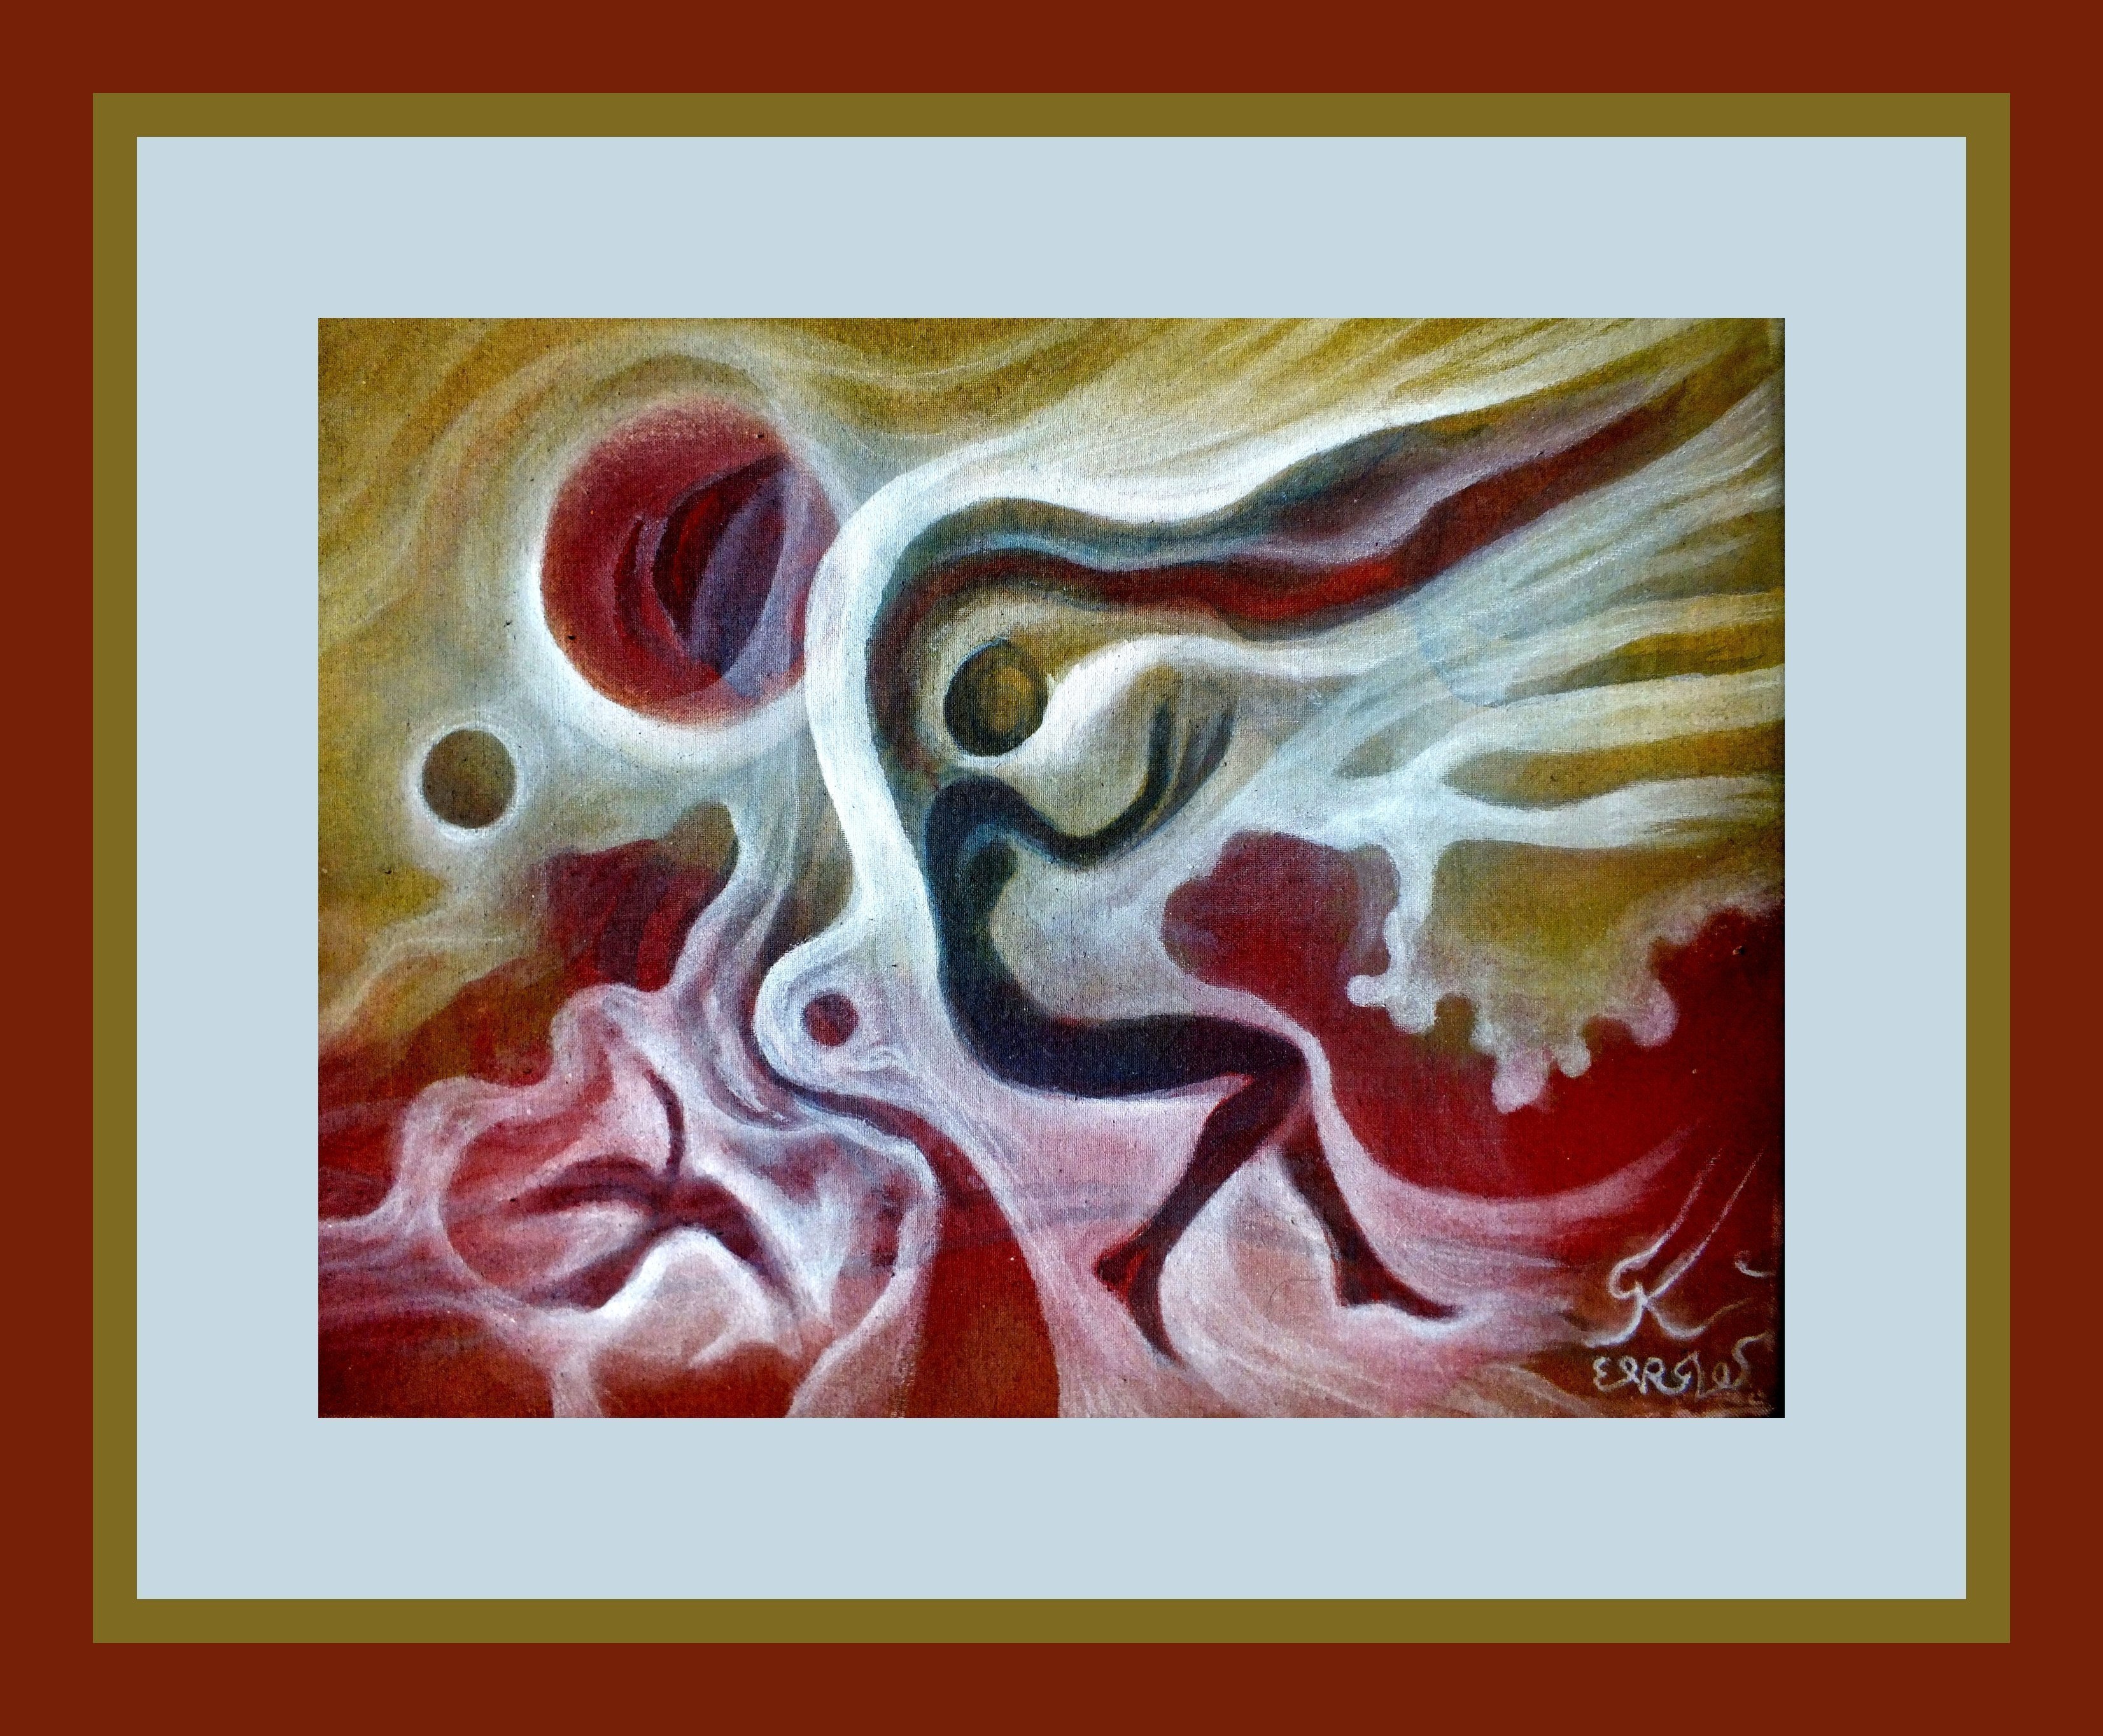 George Katevenis: 'Virgo wind', 2020 Mixed Media, Abstract Figurative. EARLY IN THE MORNING WHEN THE WIND IS MIXED WITH THE AWAKENING EARTH THE MIND FACES THE FORM ANEW.  mix mediaon CANVAS ...